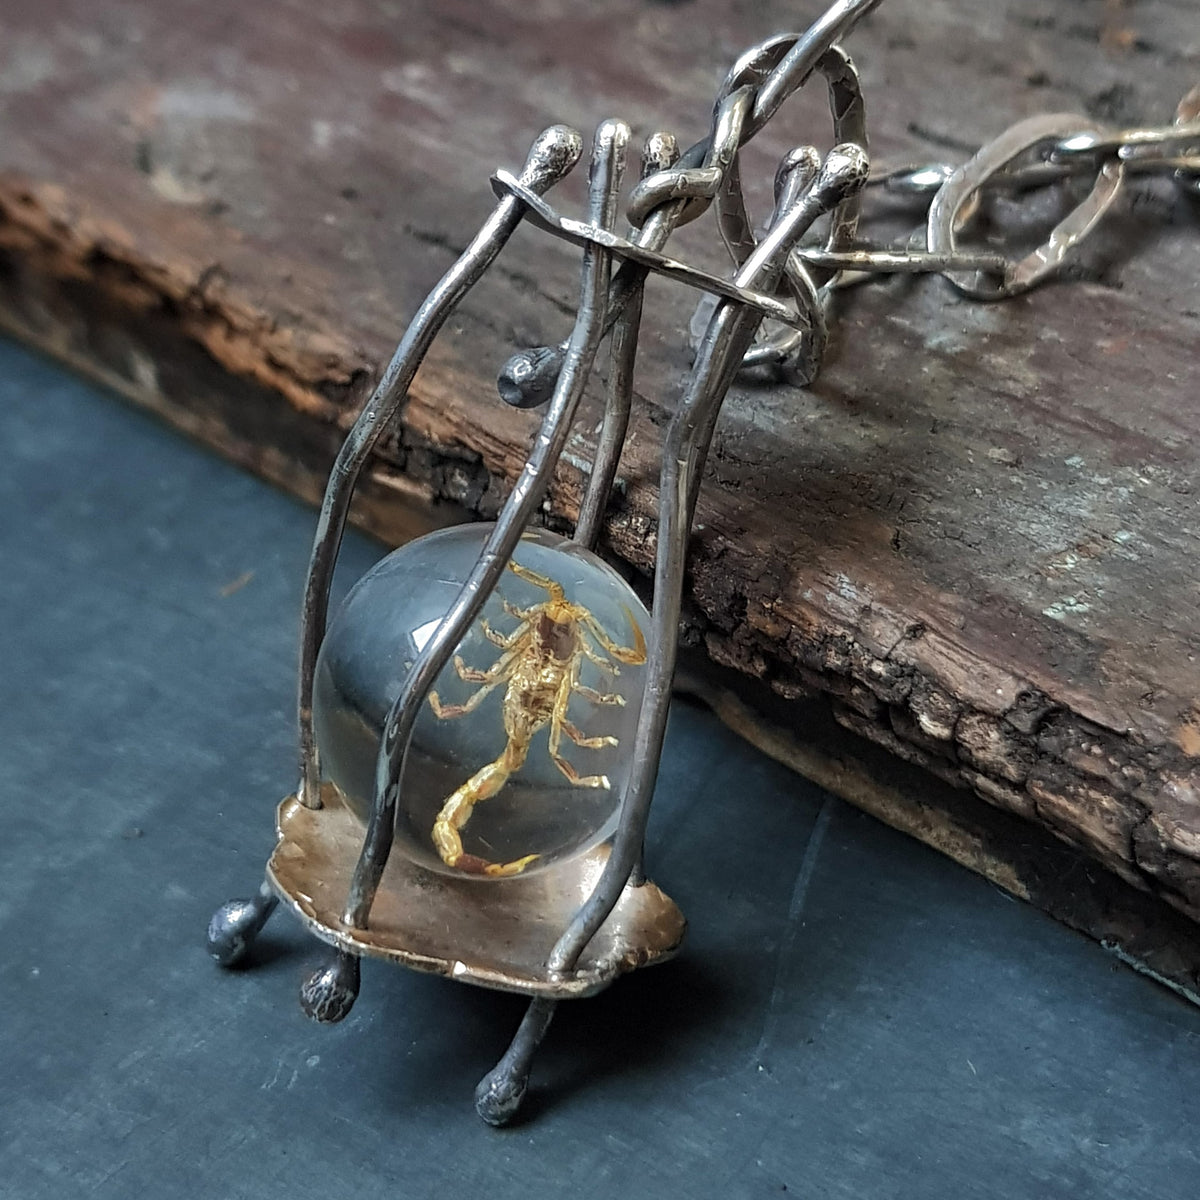 cage pendant with scorpion inside. Handcrafted chain hammered and oxidized silver links, by roff